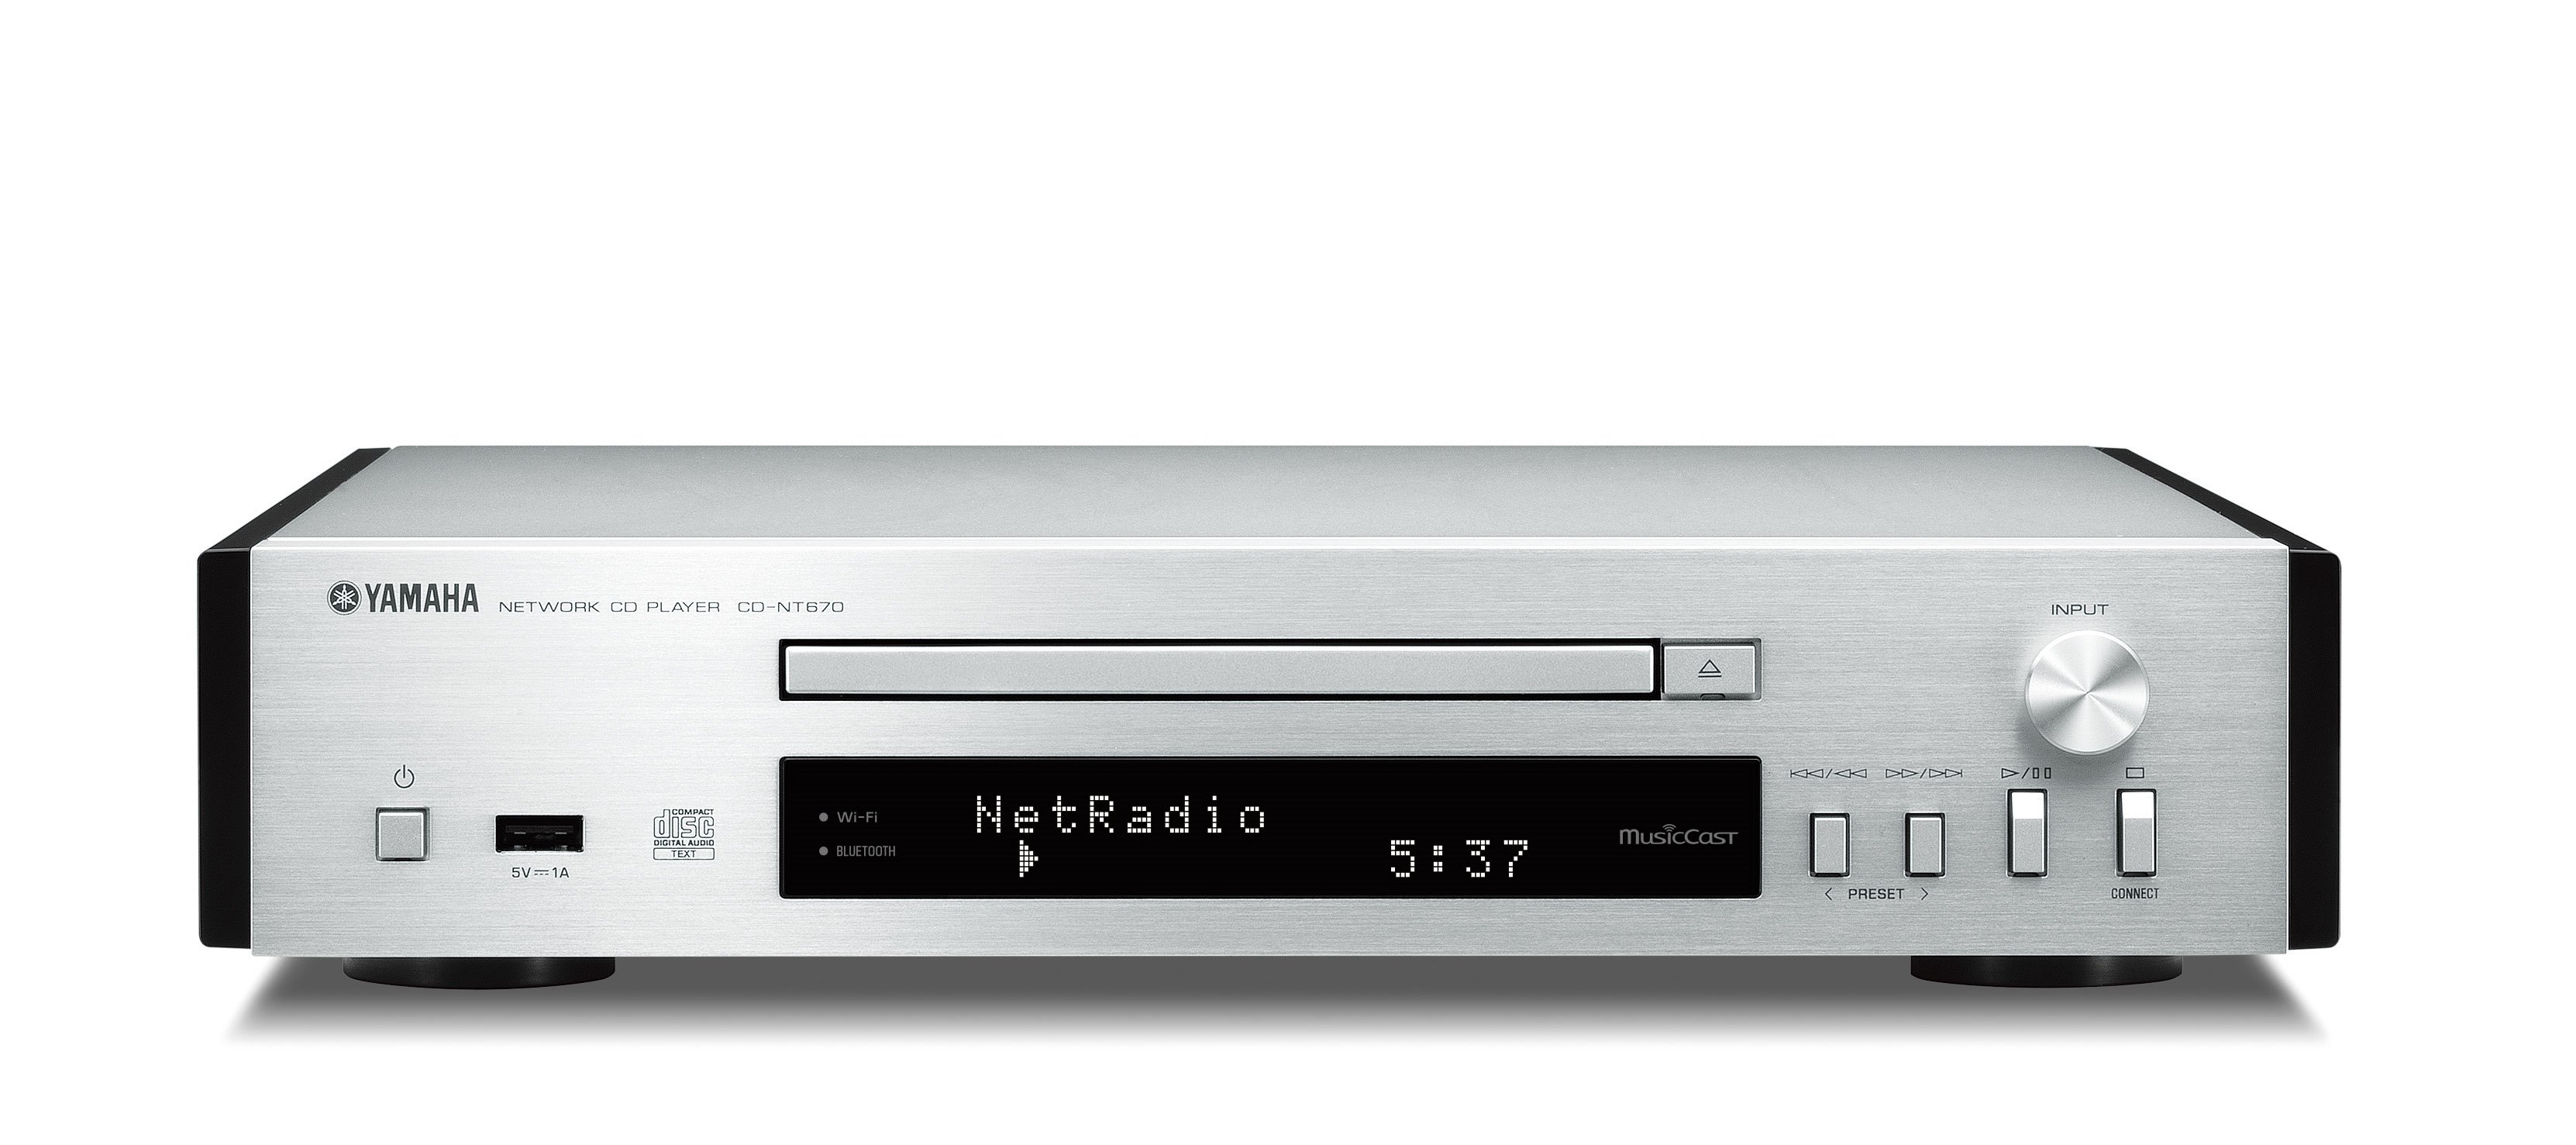 CD-NT670 - Overview - HiFi Components - Audio & Visual - Products